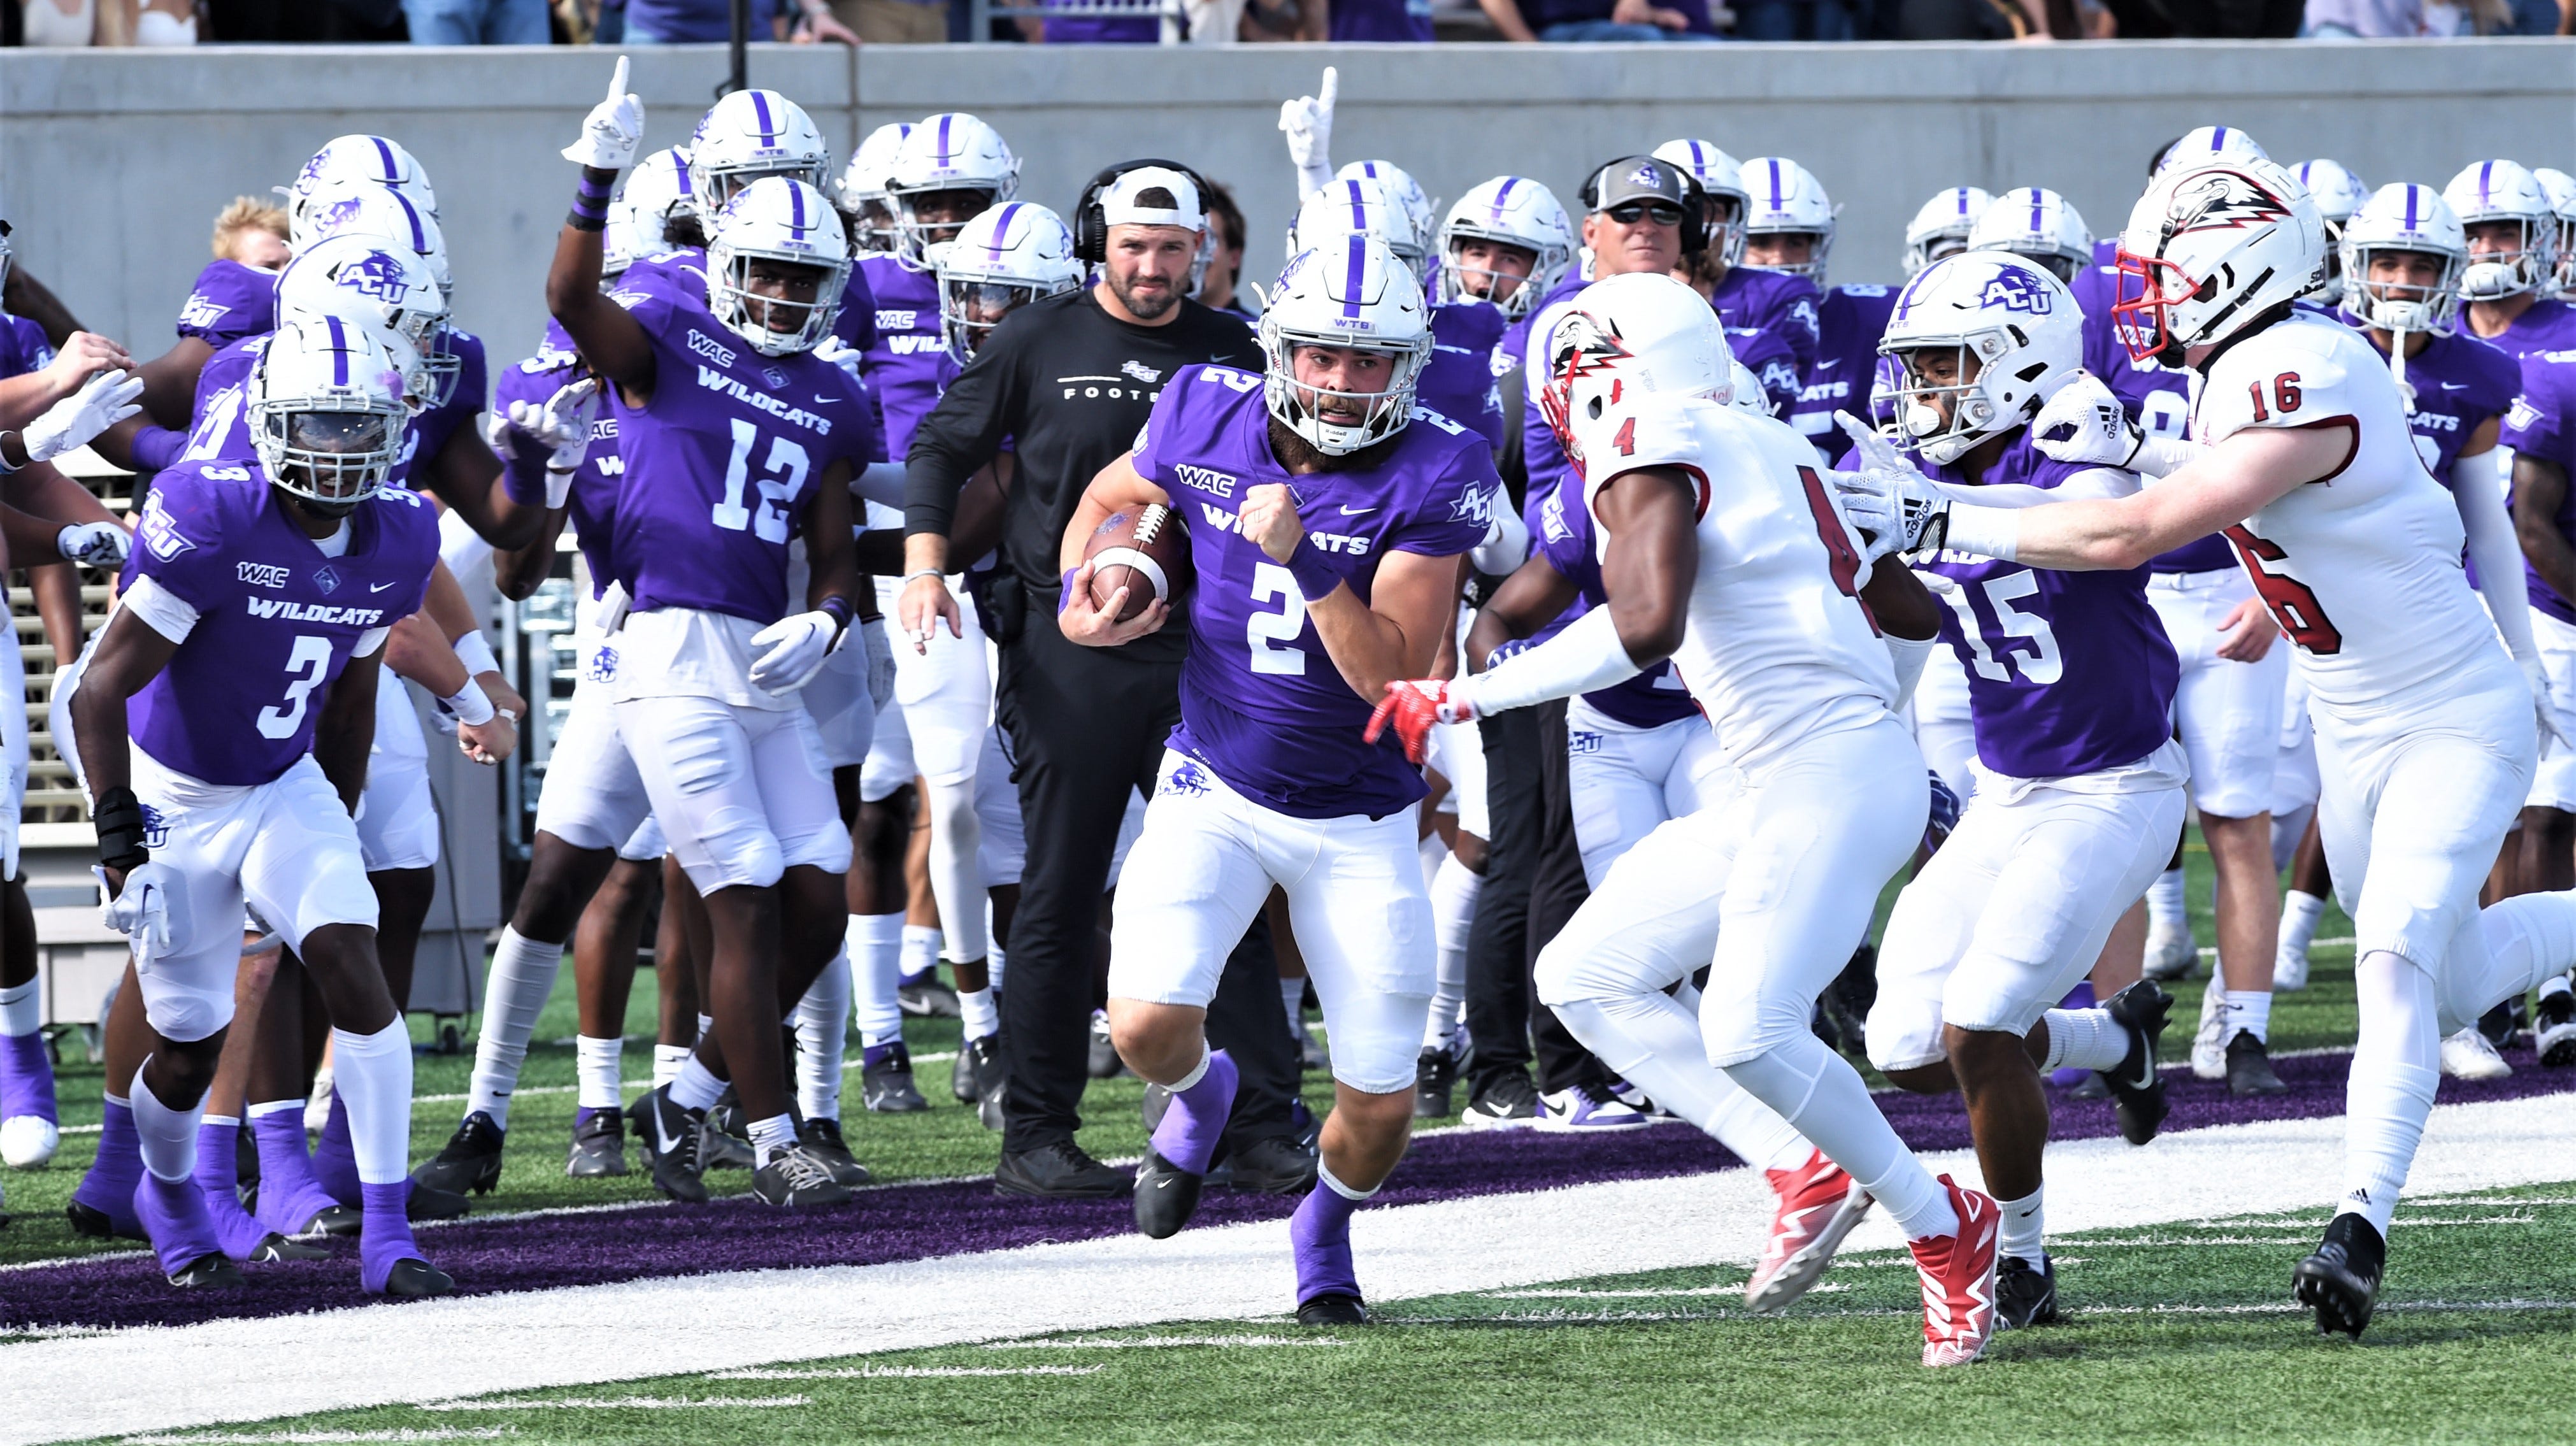 ACU holds off Southern Utah in WAC football game